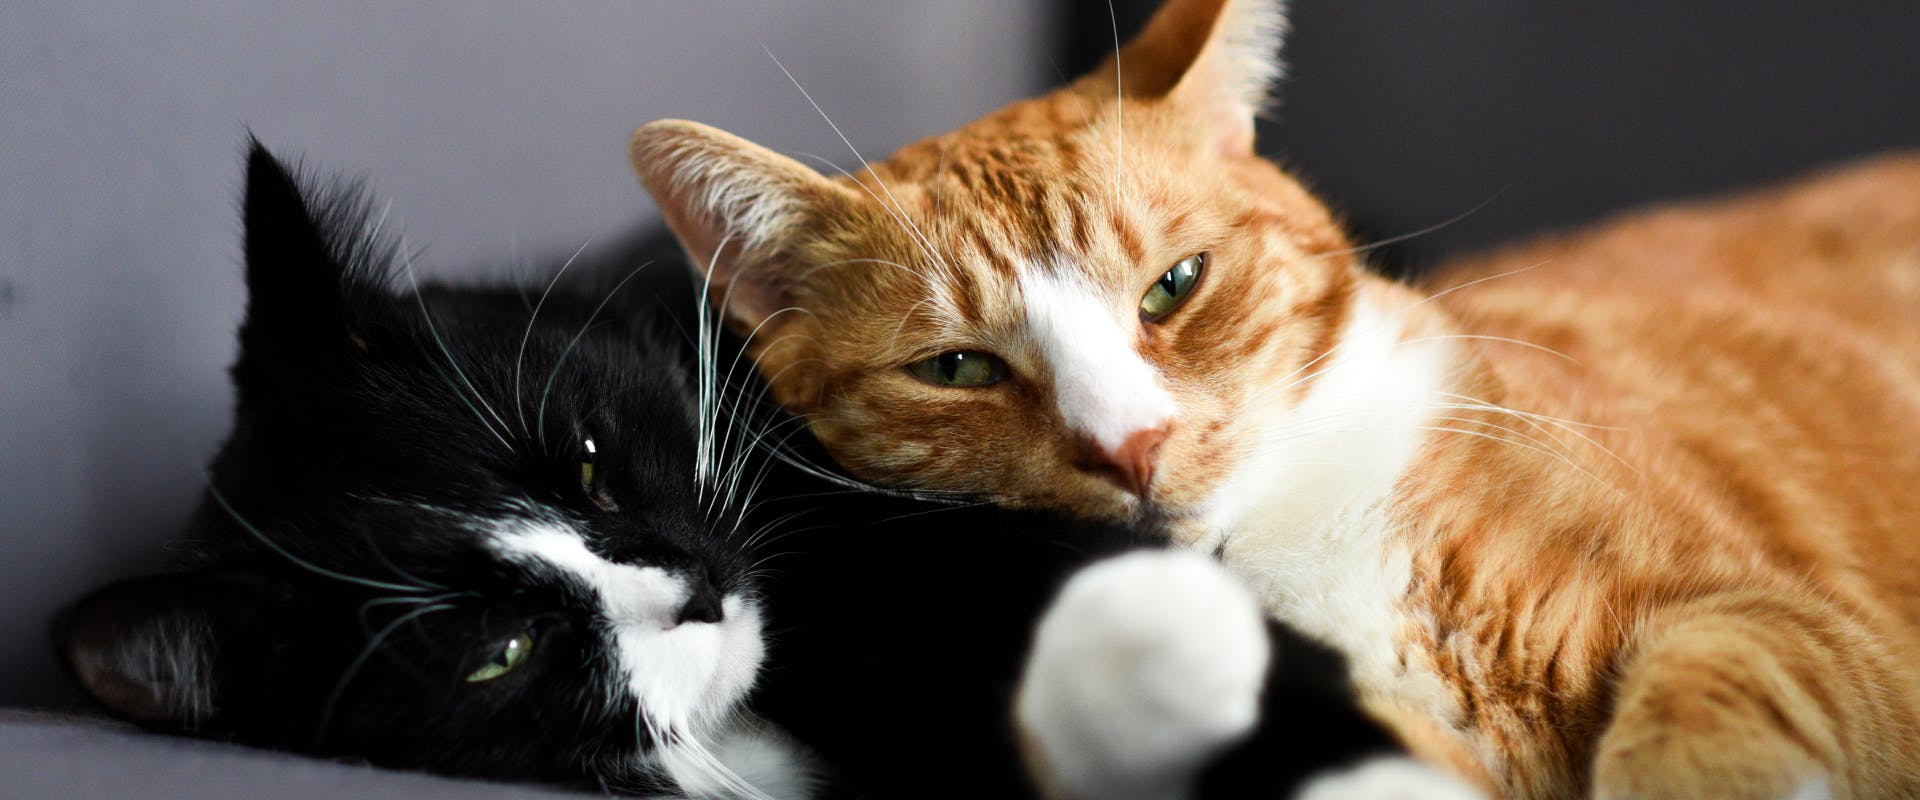 a ginger tabby lying on top of a tuxedo cat who is also lying down on a gray couch